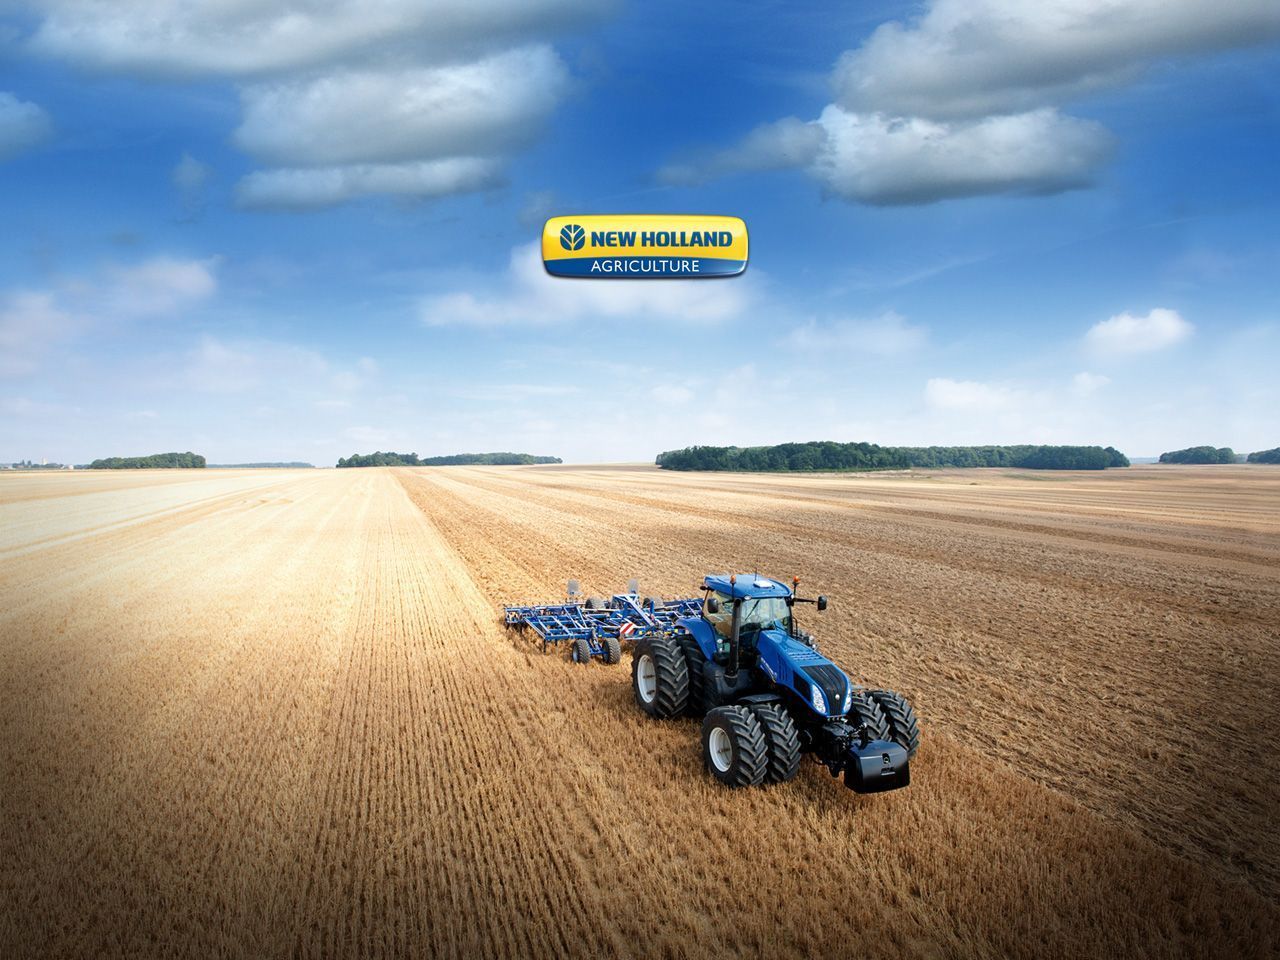 New Holland Agriculture, Wallpaper. New holland agriculture, New holland, New holland tractor